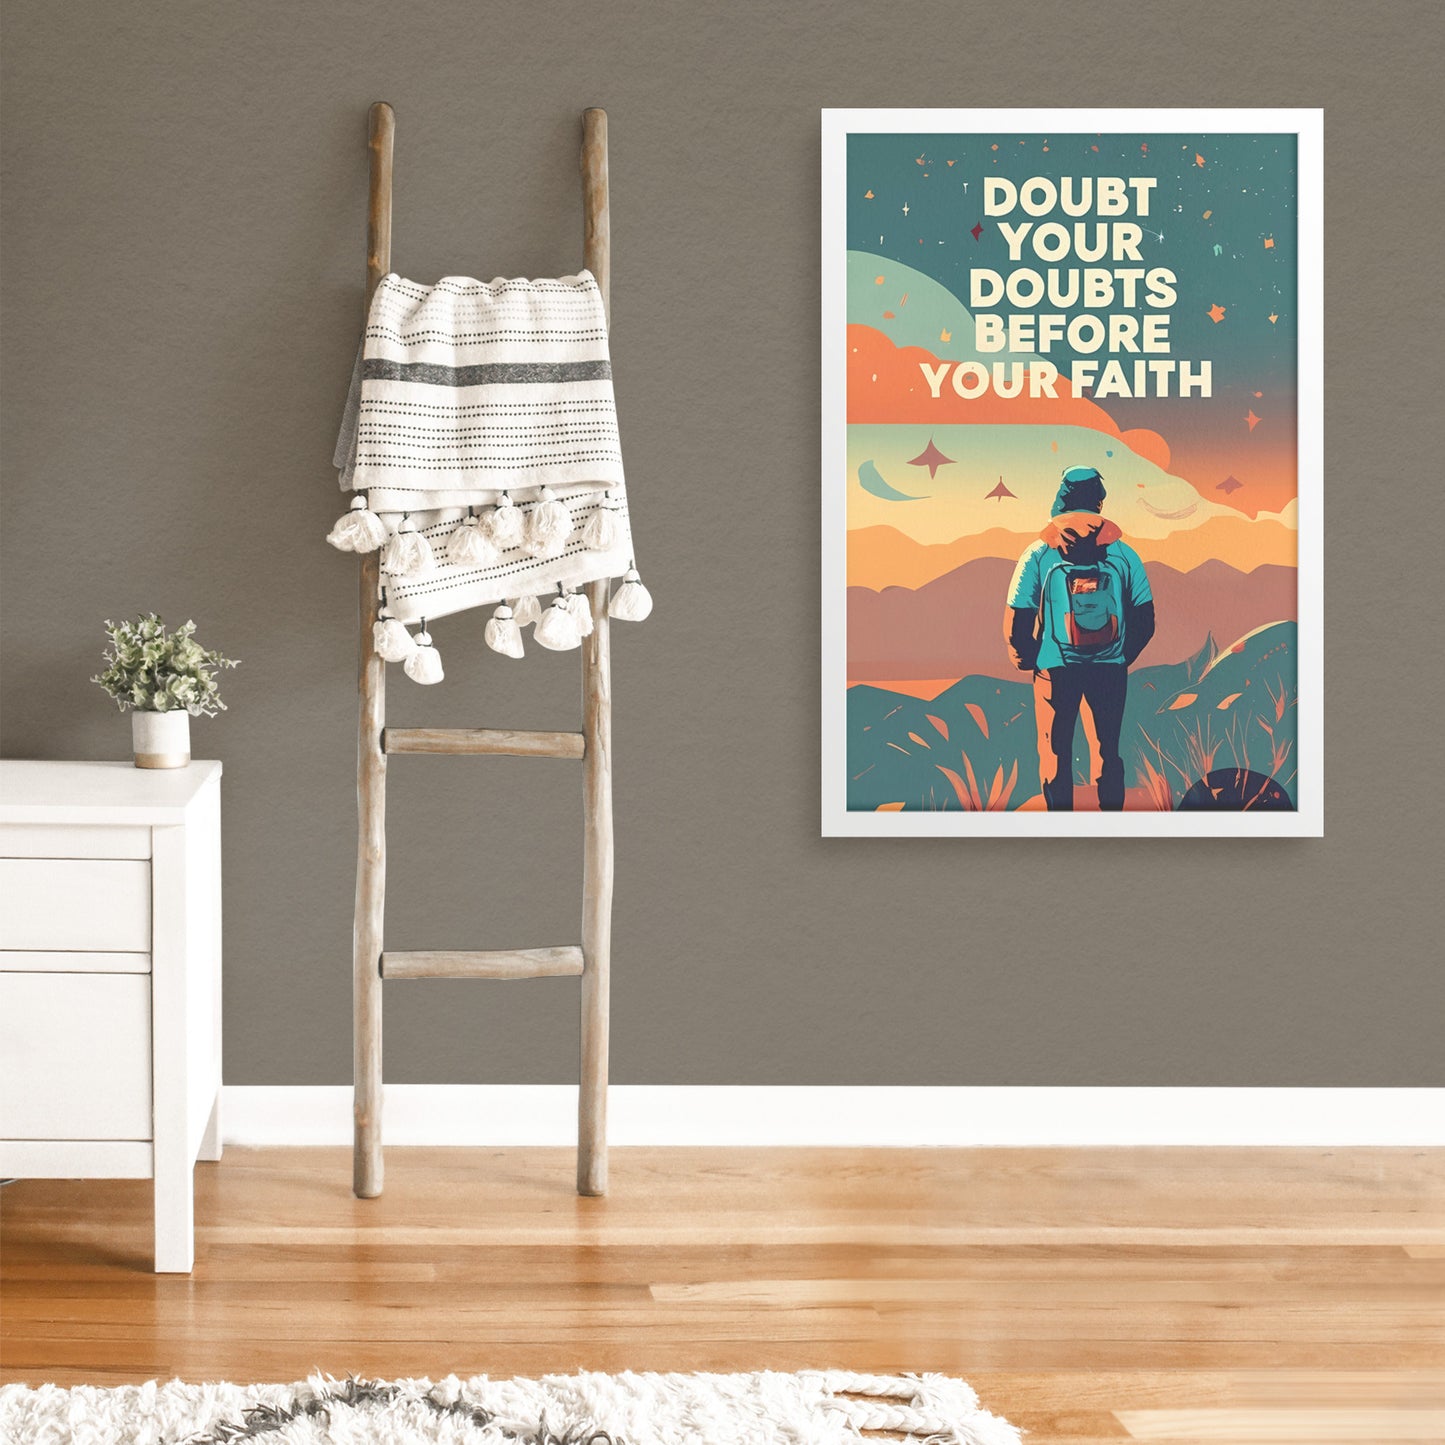 Doubt Your Doubts Before Your Faith Retro Style Framed Poster